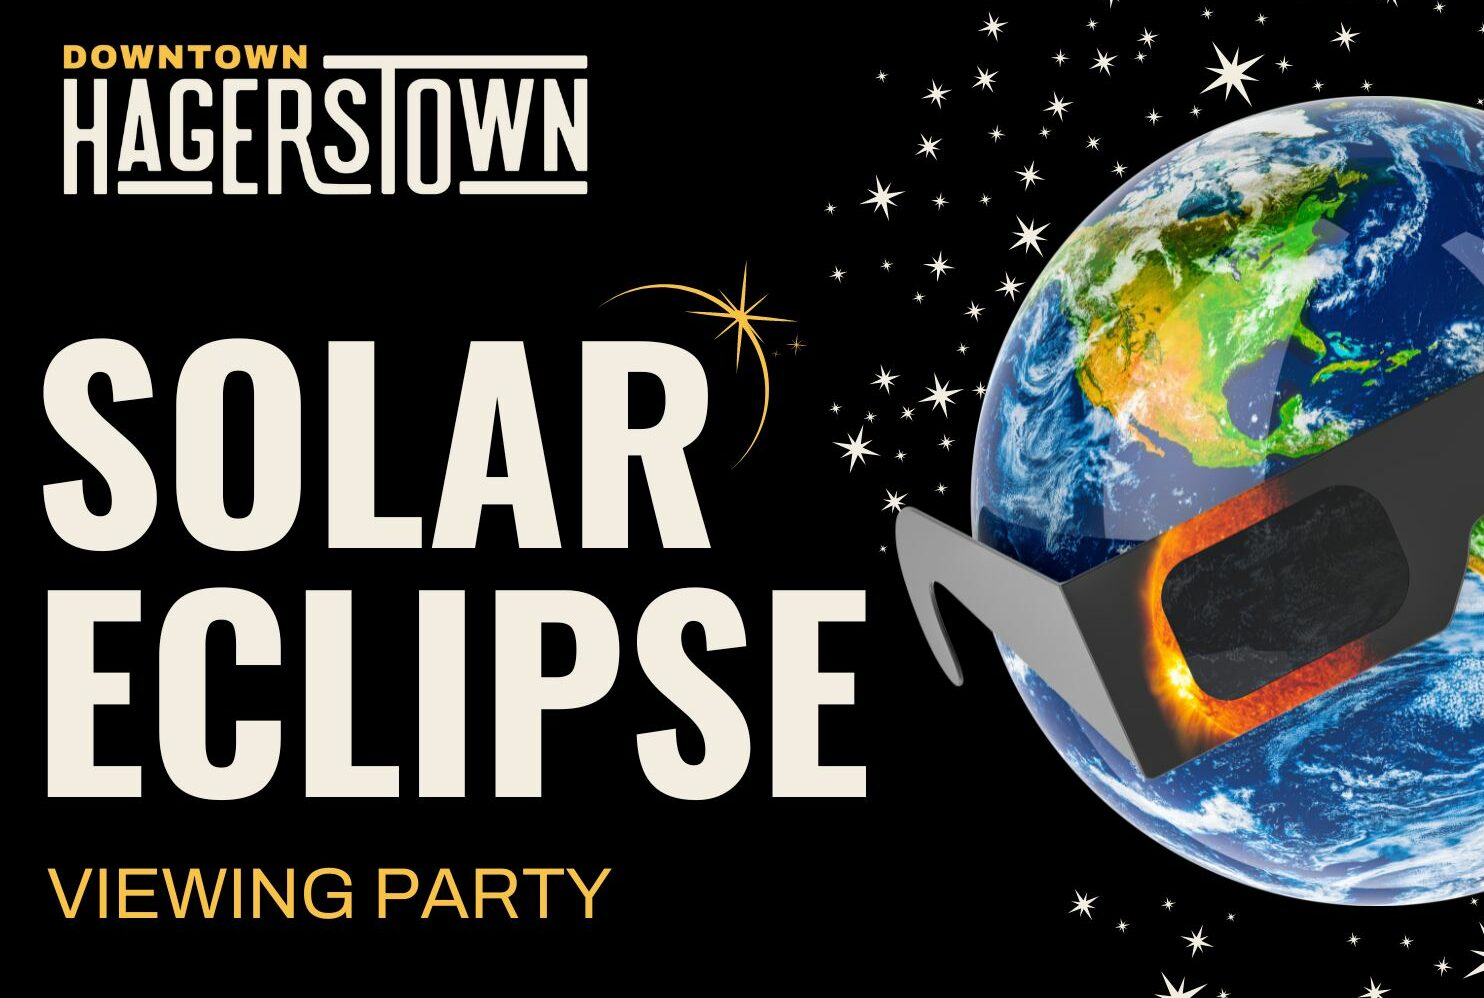 <h1 class="tribe-events-single-event-title">Ryan Hosts the Downtown Hagerstown Solar Eclipse Viewing Party</h1>